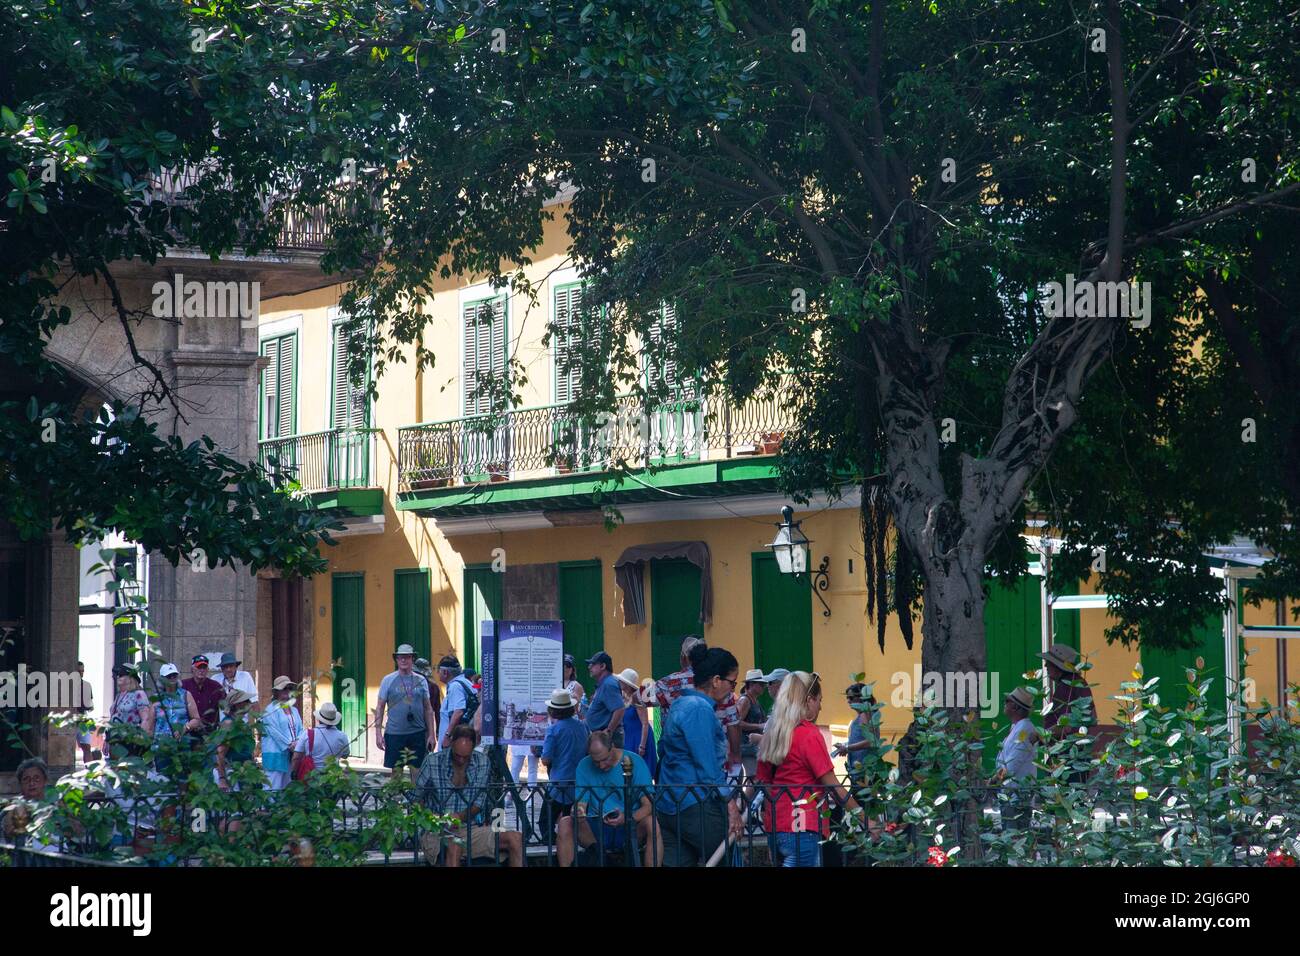 Park in old Havana where tourists gather to get out of the oppressive heat of Havana. Stock Photo